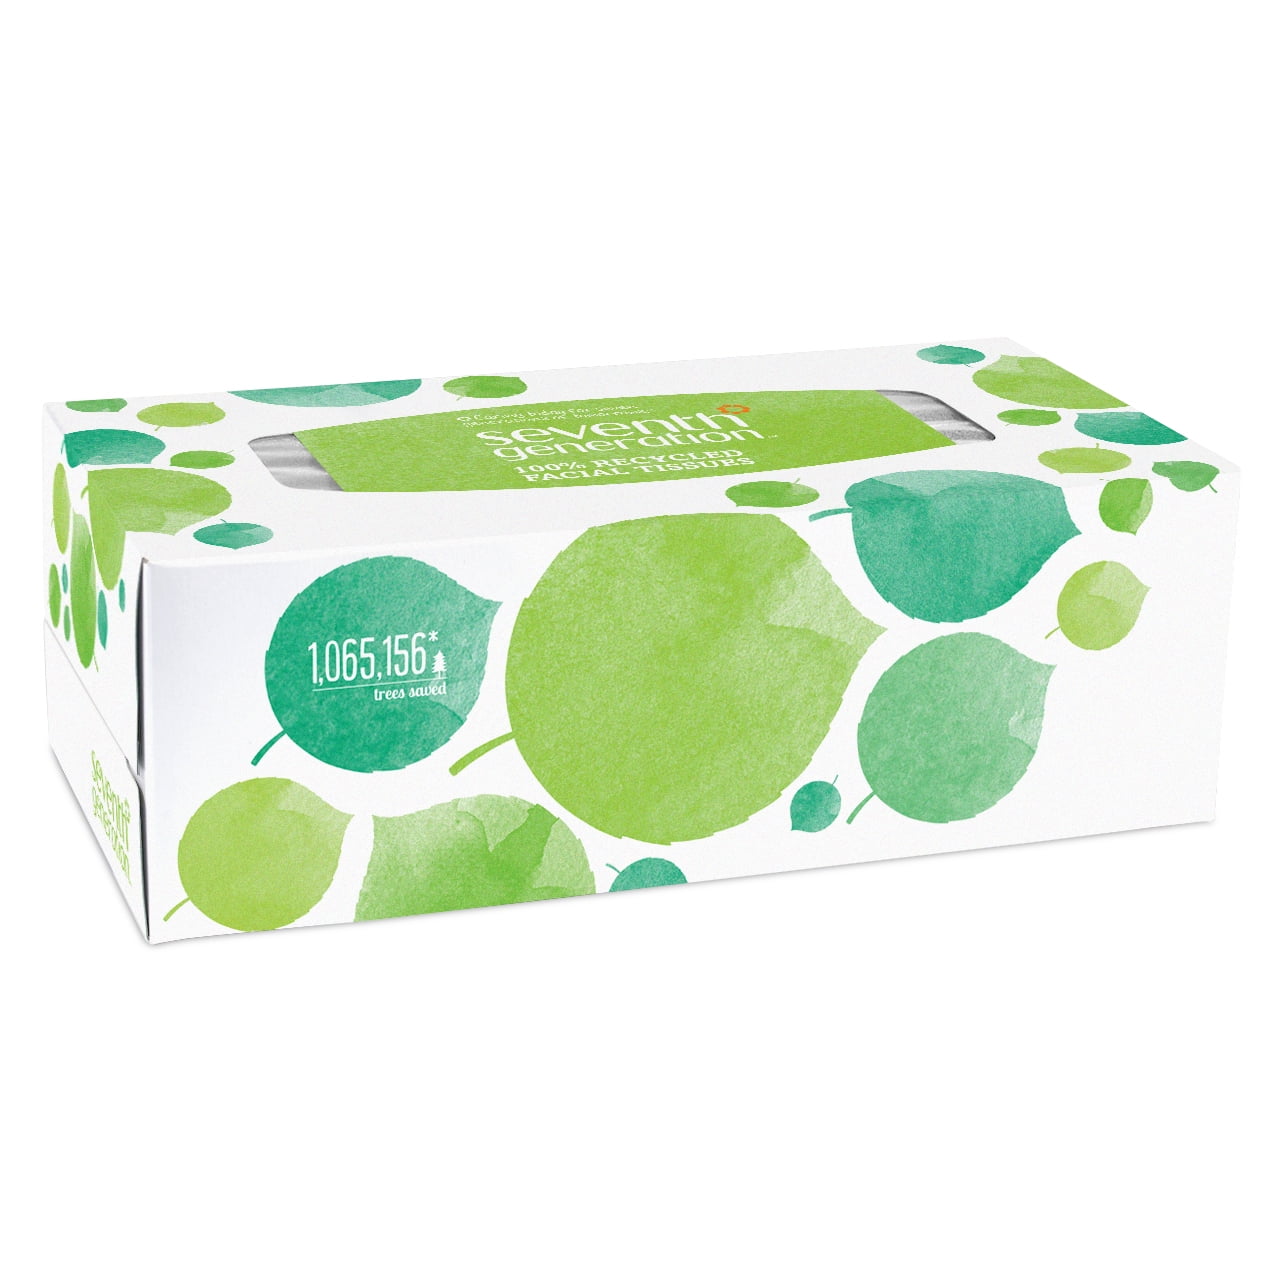 Seventh Generation Facial Tissues 2ply sheets 175 count